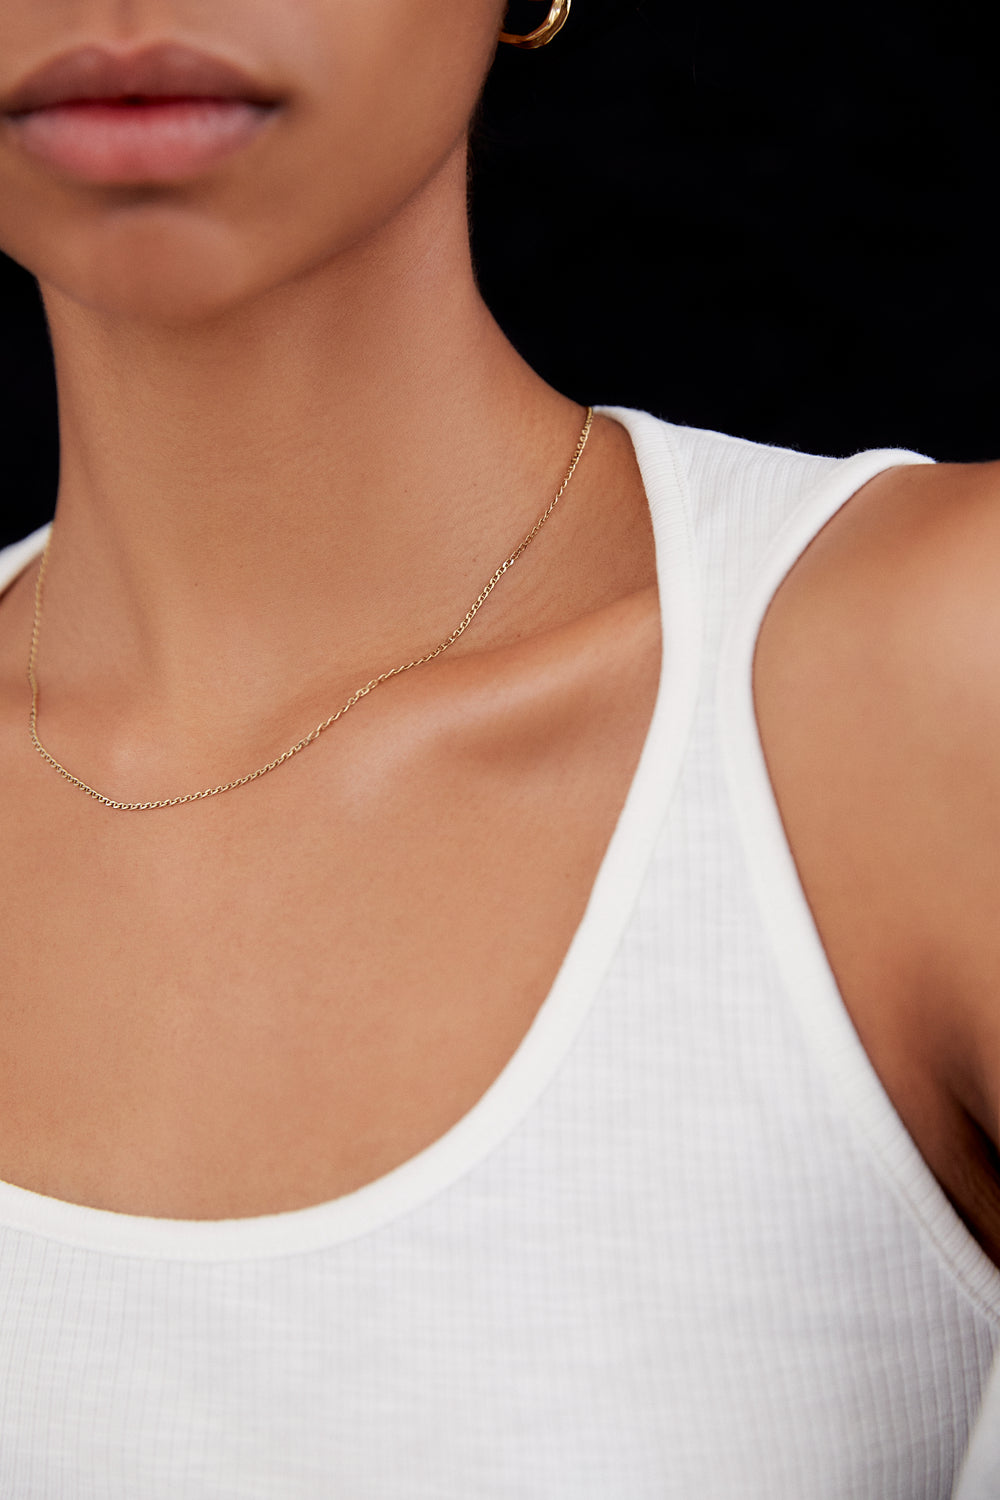 Anchor Chain Necklace | Solid Gold